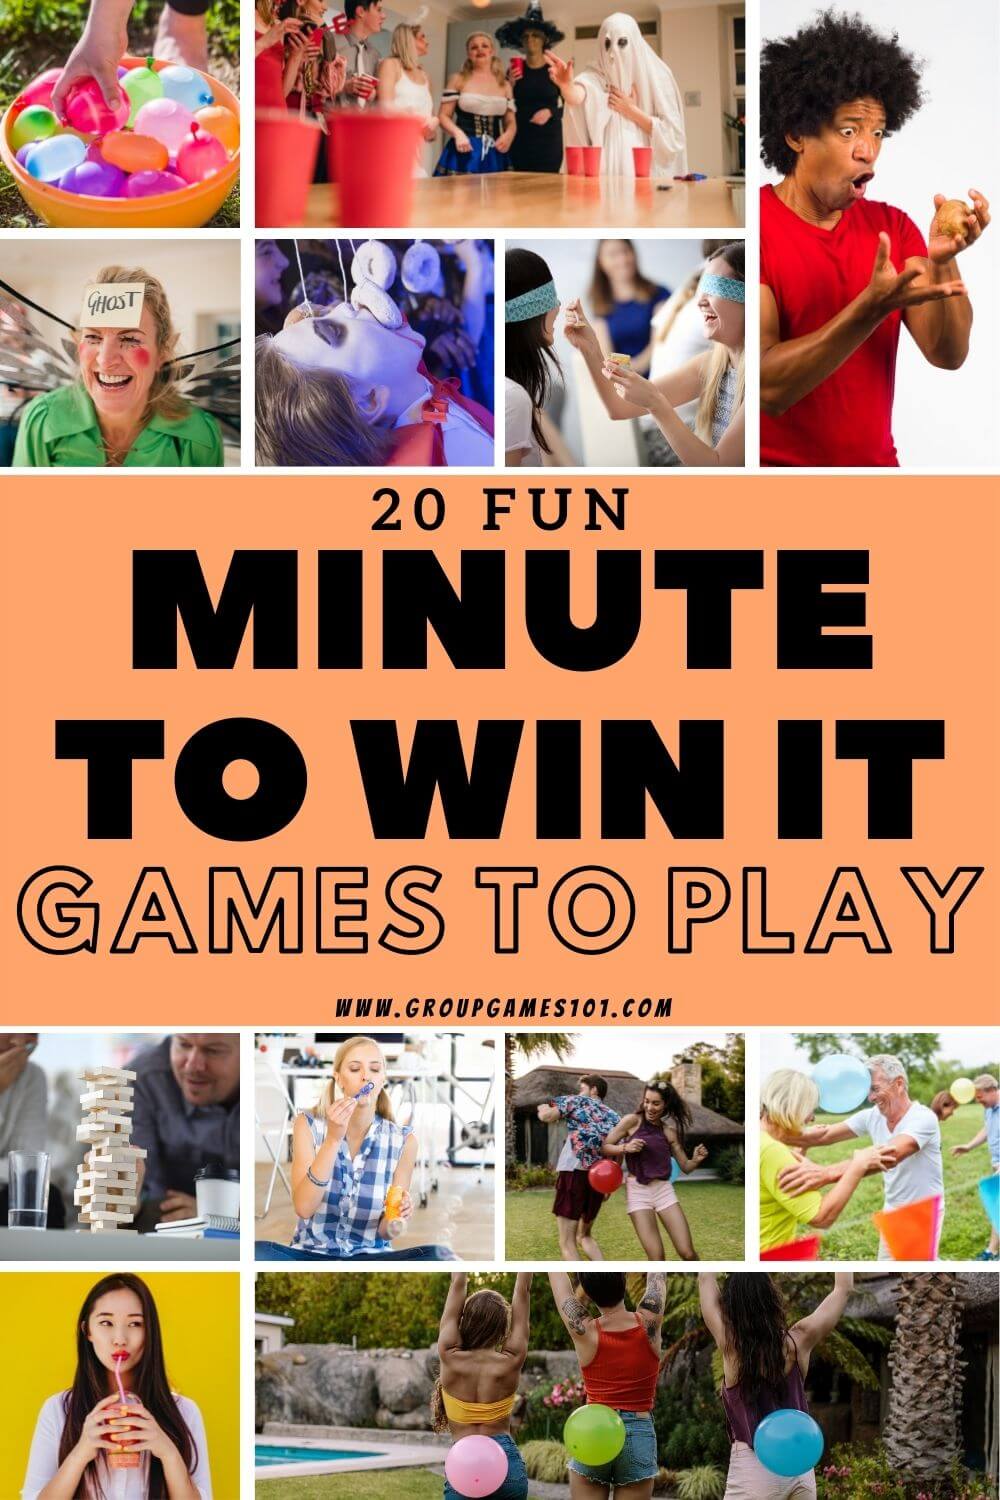 20 Fun Minute to Win it Games to Play Group Games 101